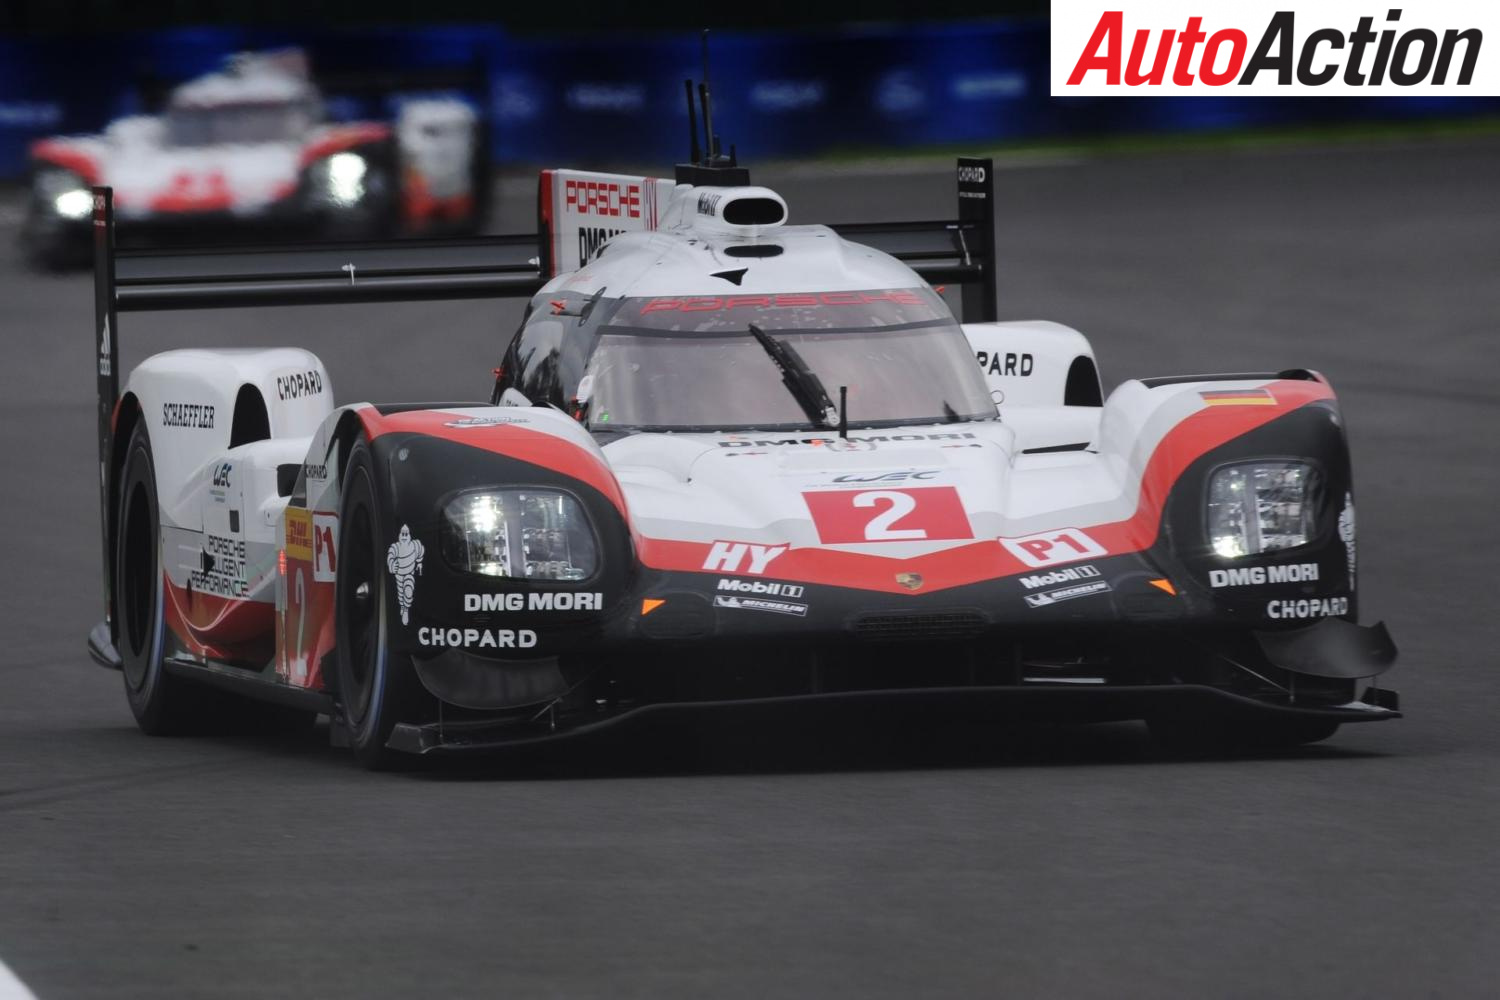 Porsche dominated the WEC round in Mexico - Photo: LAT